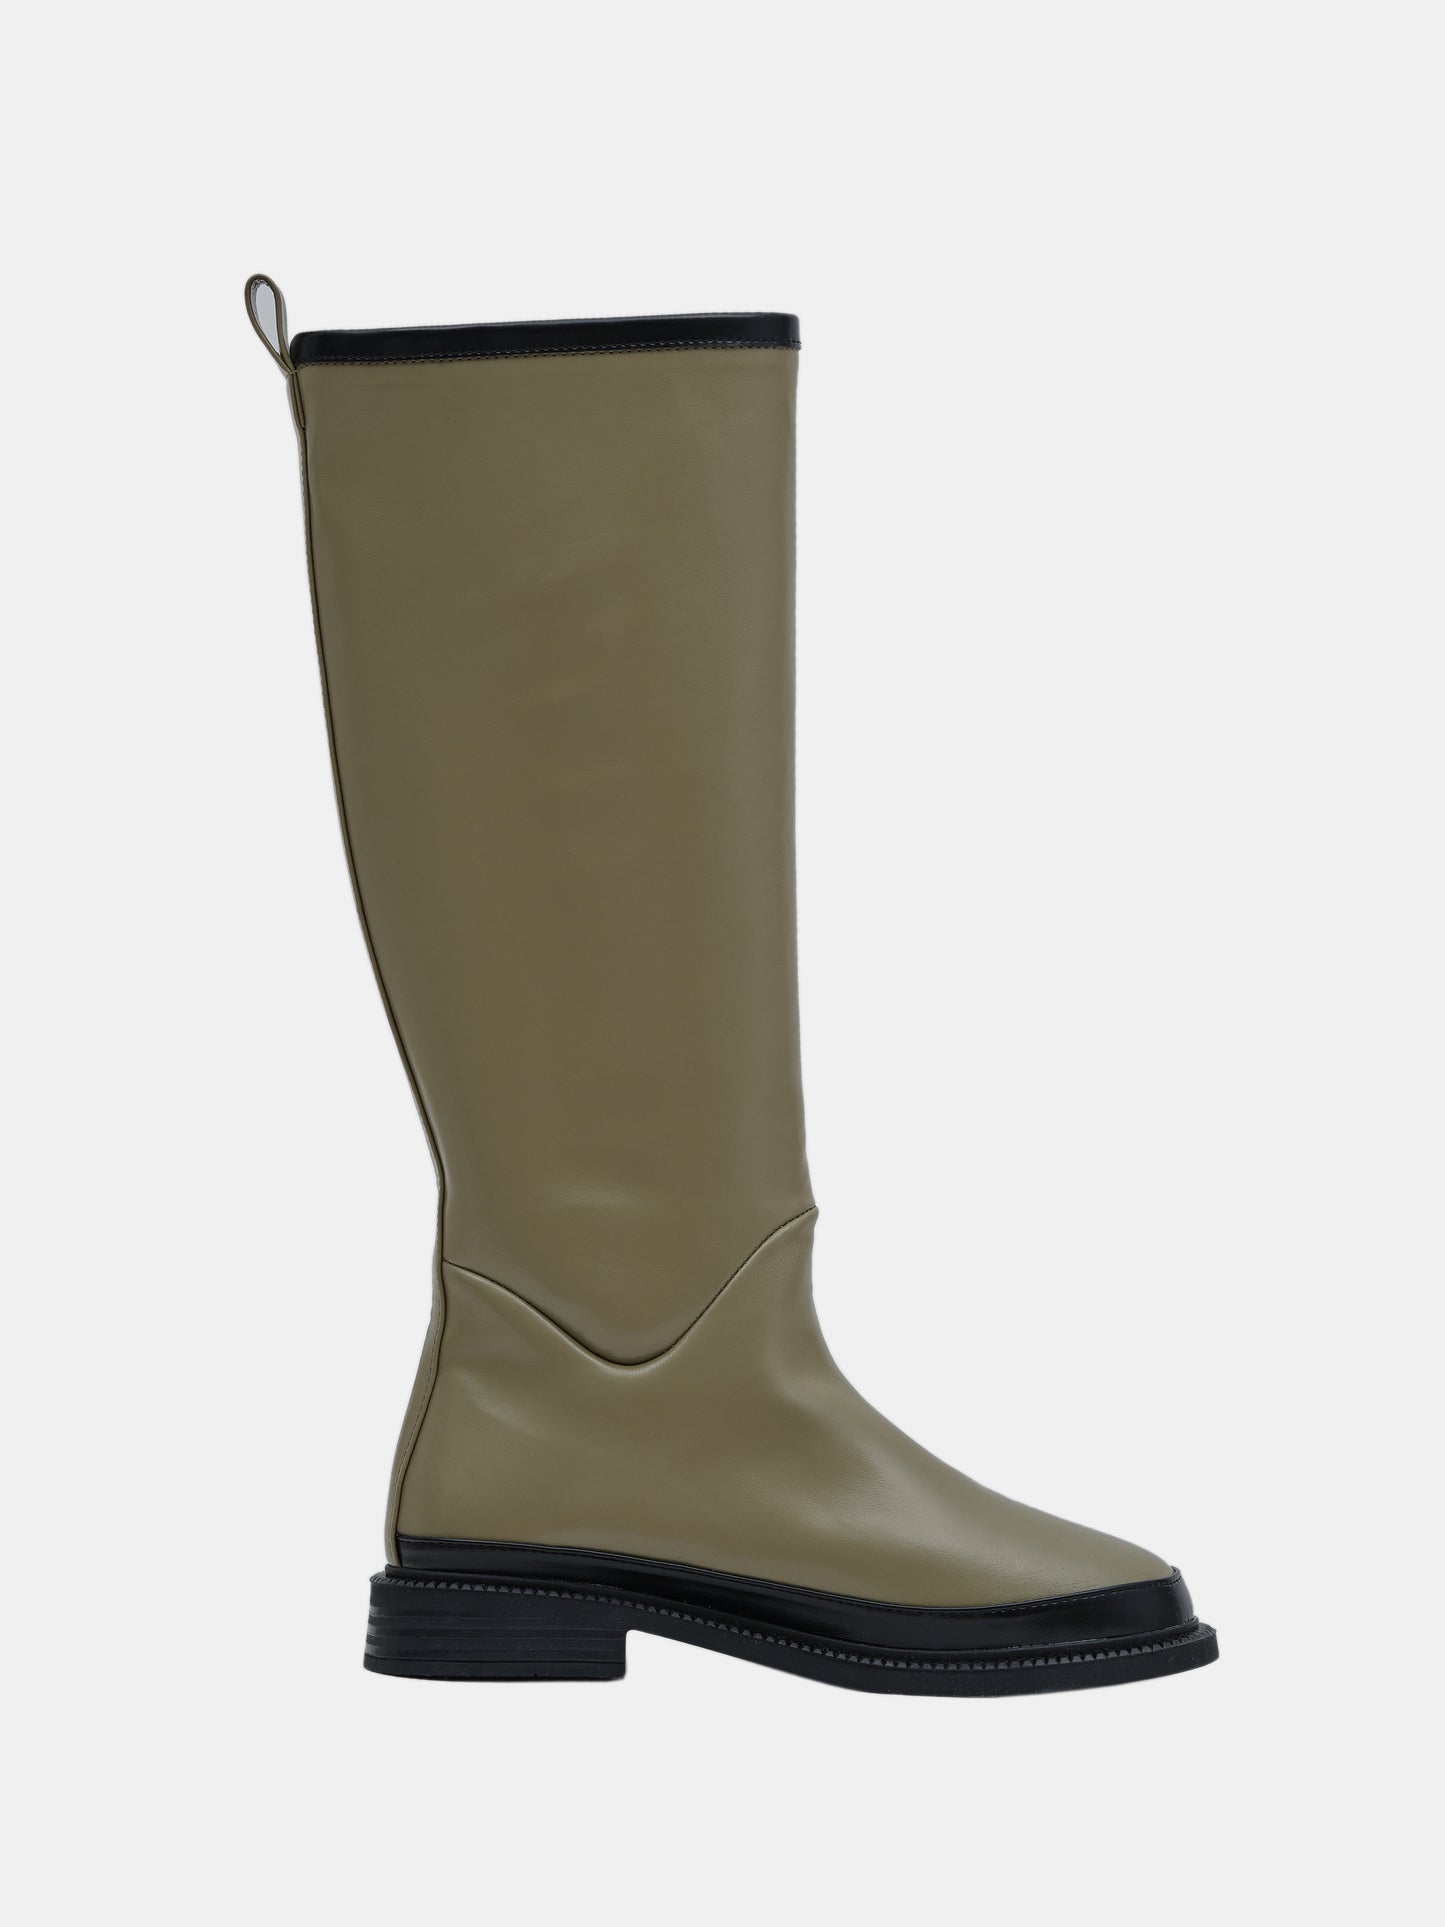 Contrast Wellington Boots, Olive